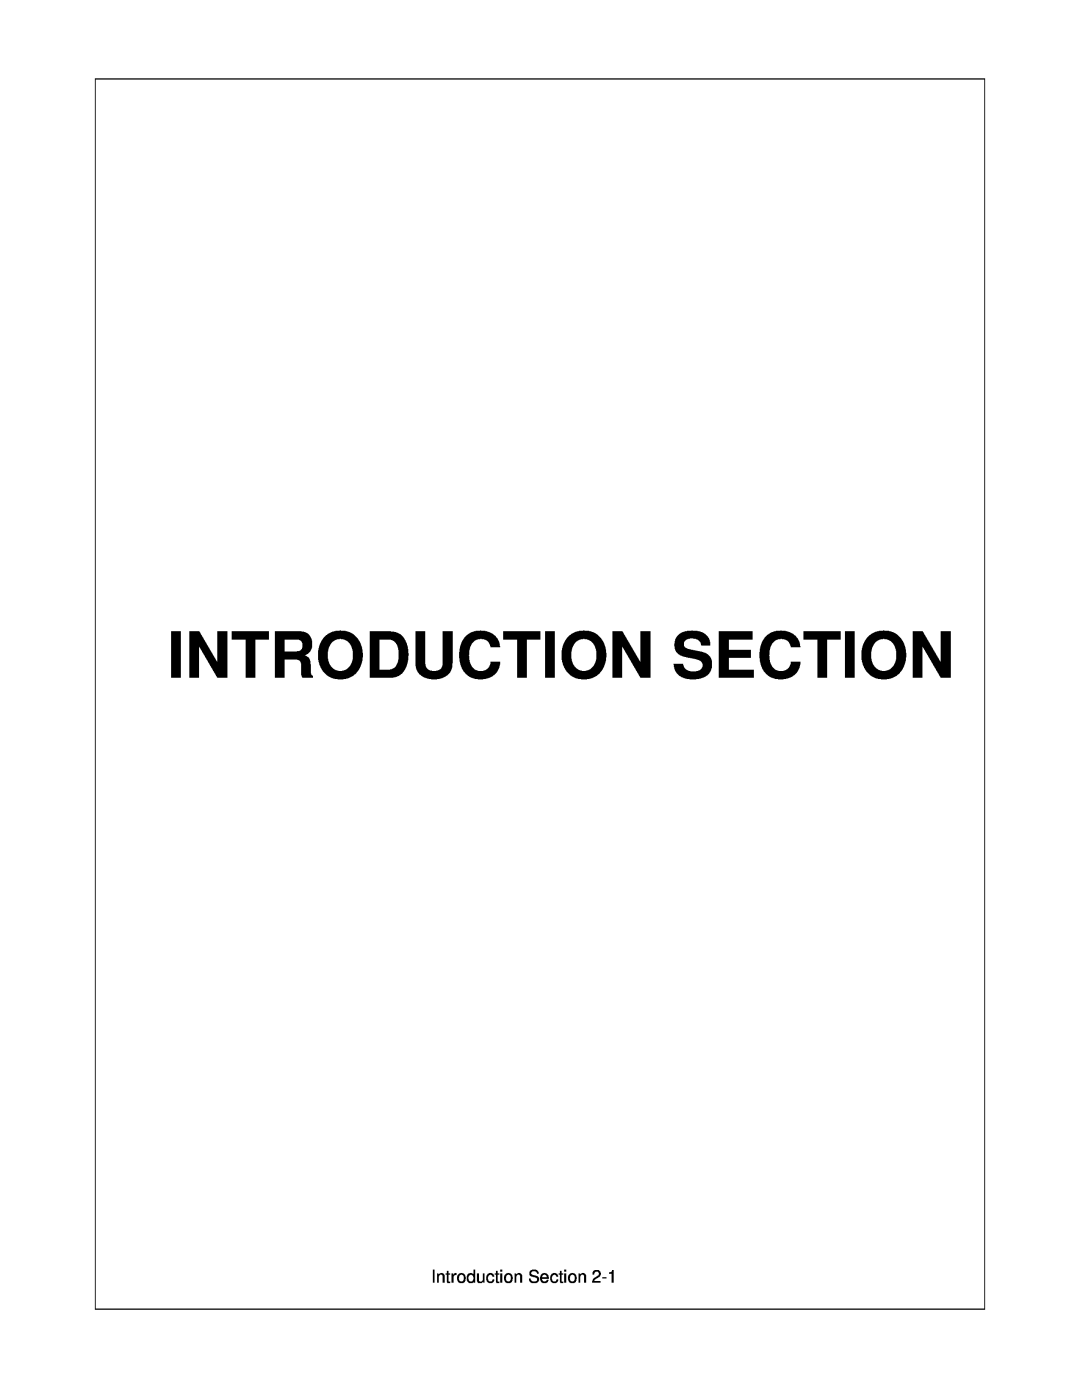 Rhino Mounts 148 manual Introduction Section 